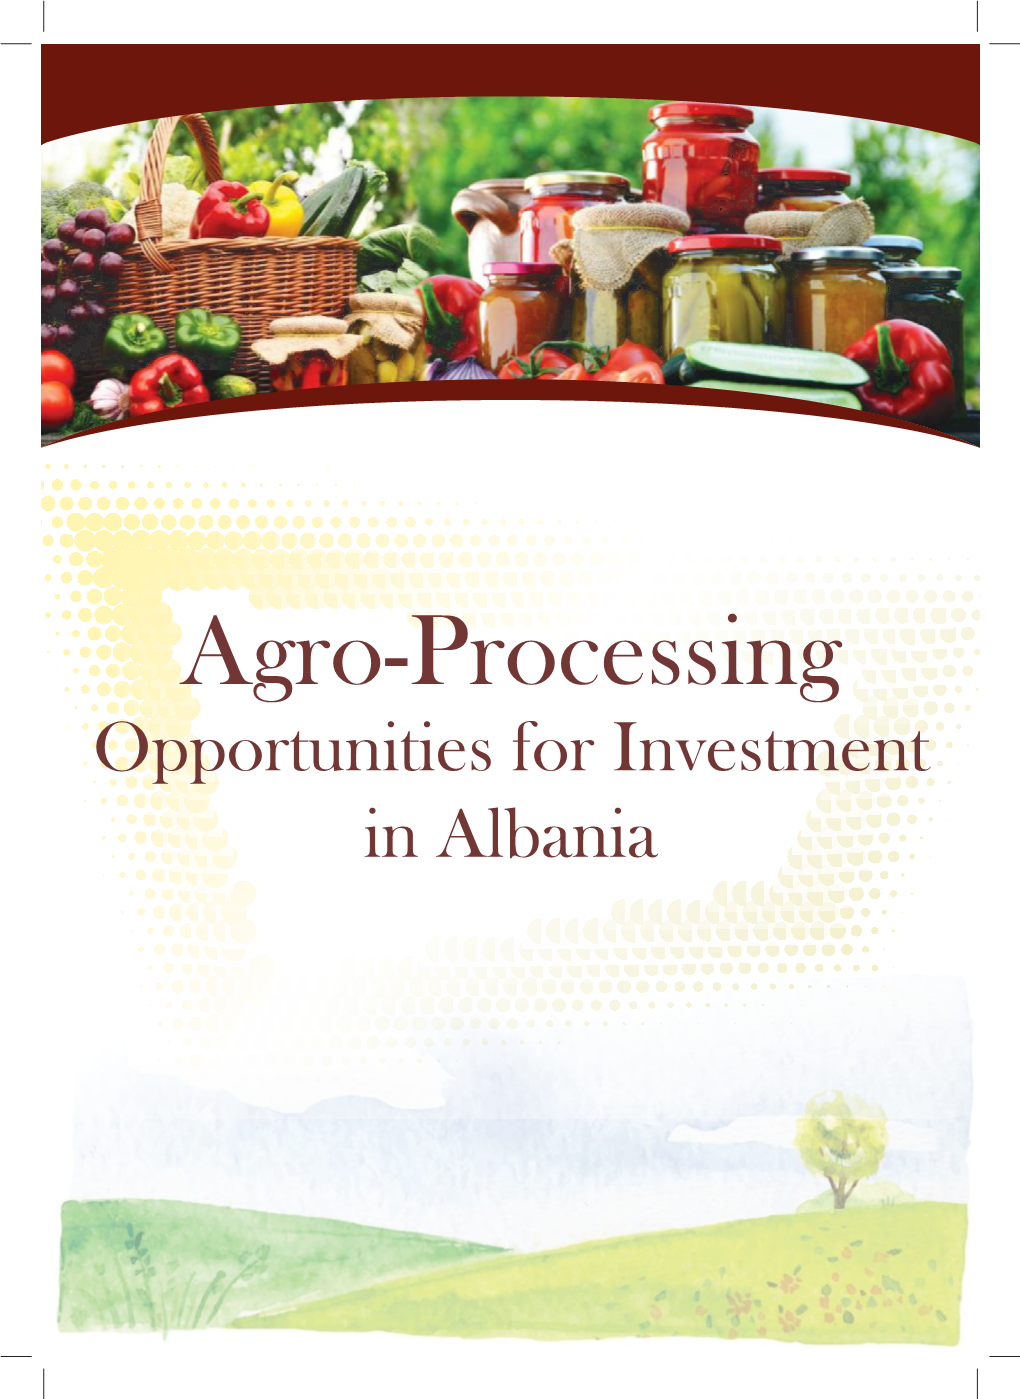 Agro-Processing Opportunities for Investment in Albania